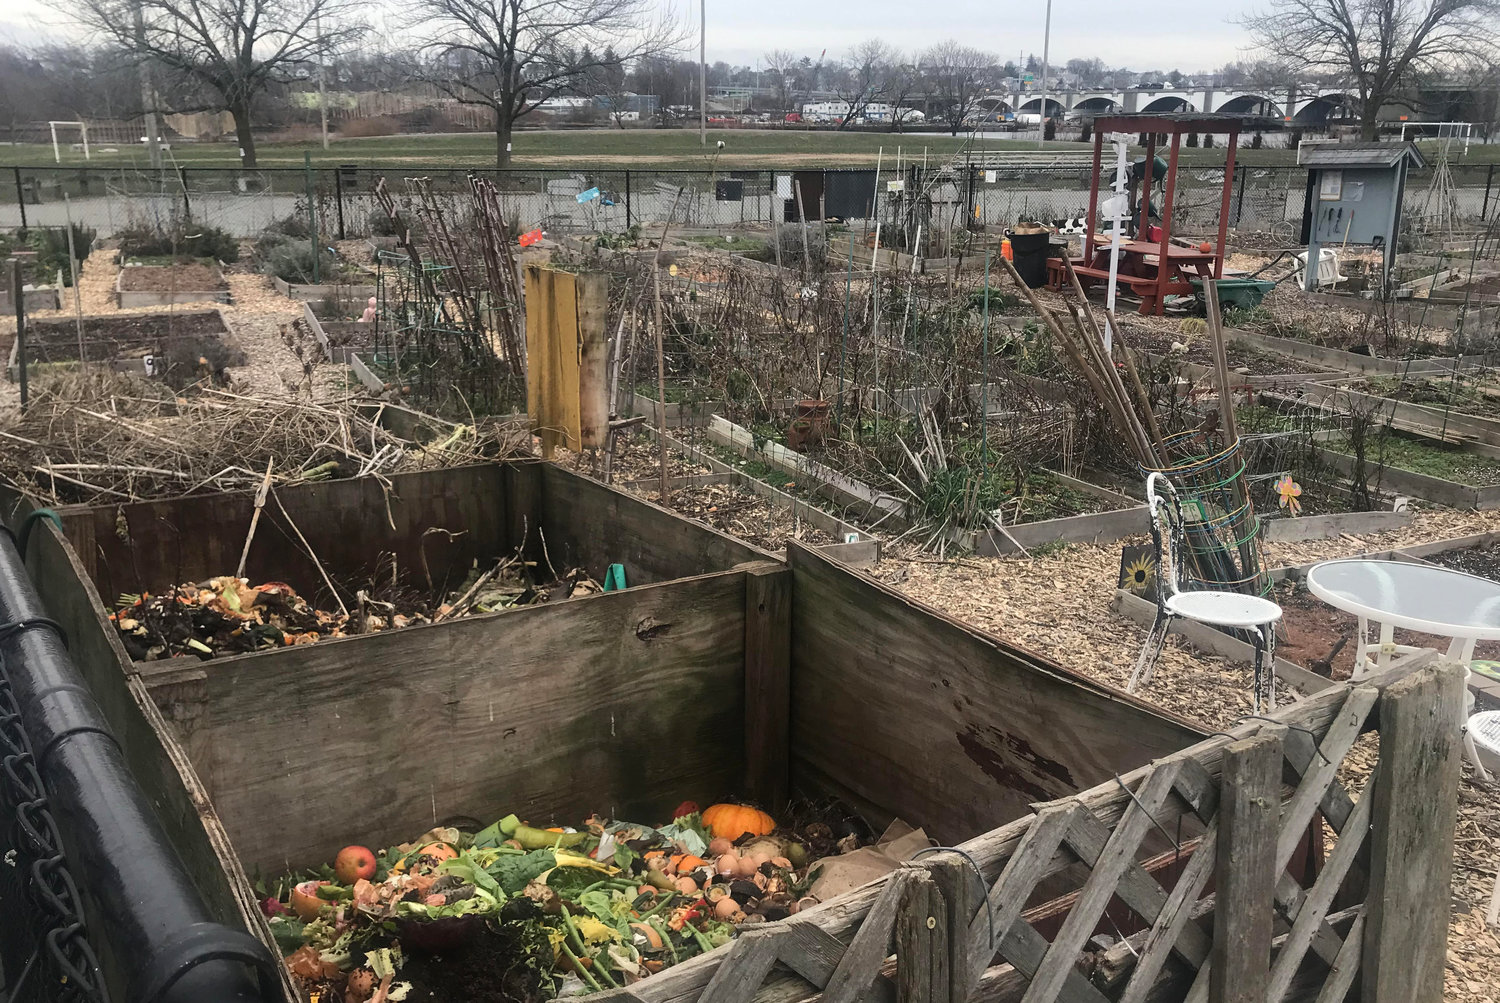 Nonprofit group Harvest Cycle has proposed an updated composting system for the East Side